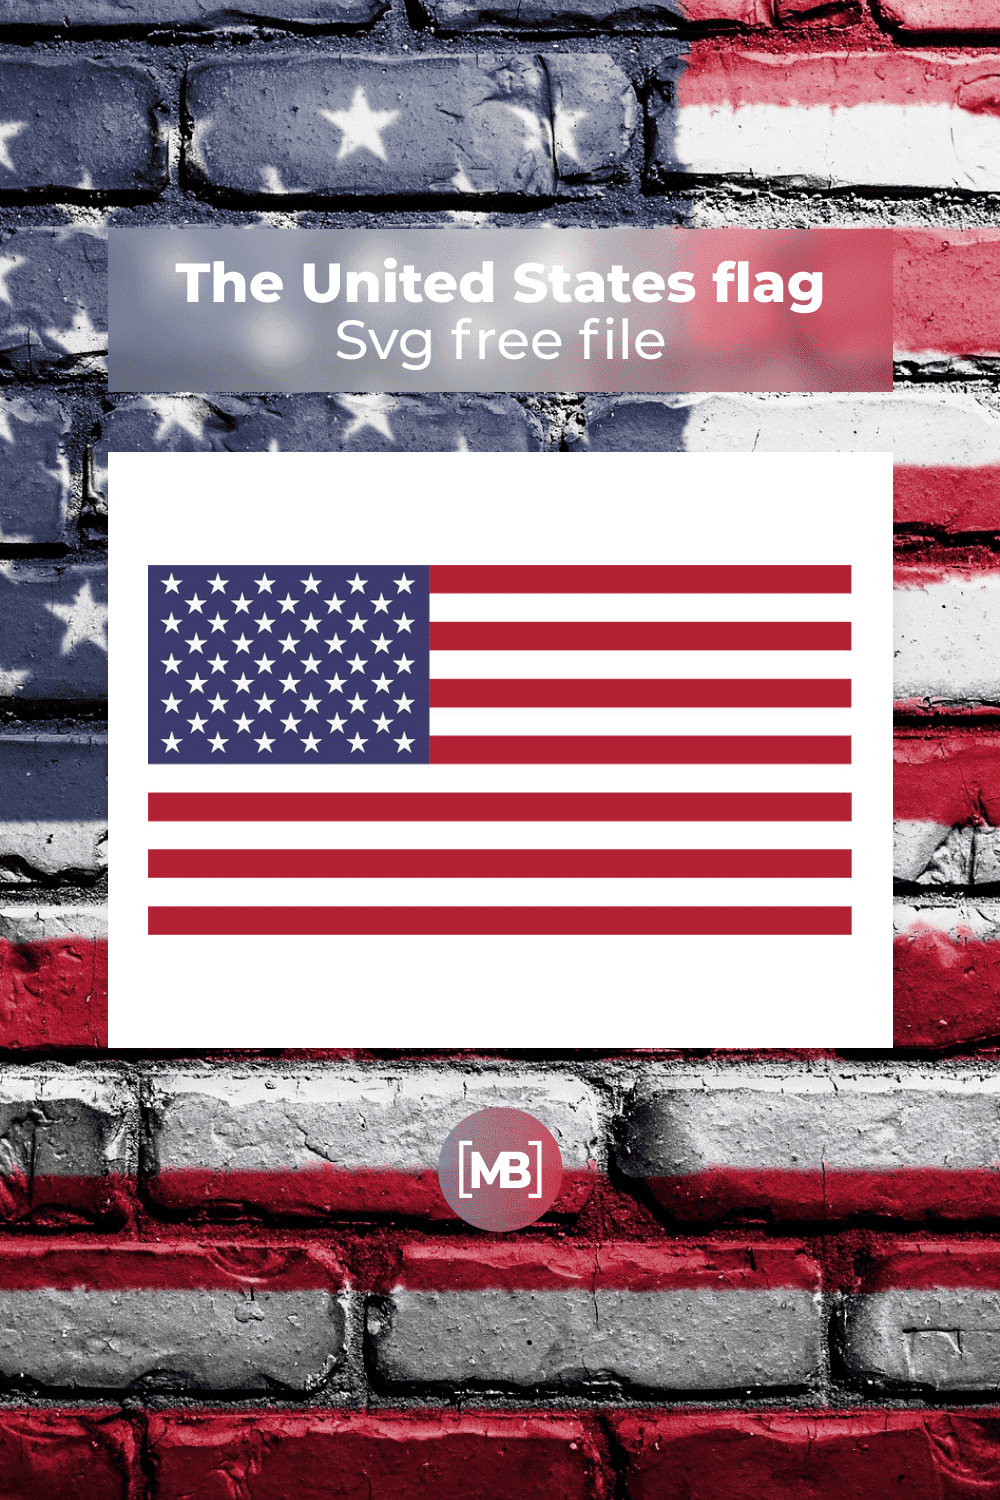 The United States flag Svg free file.